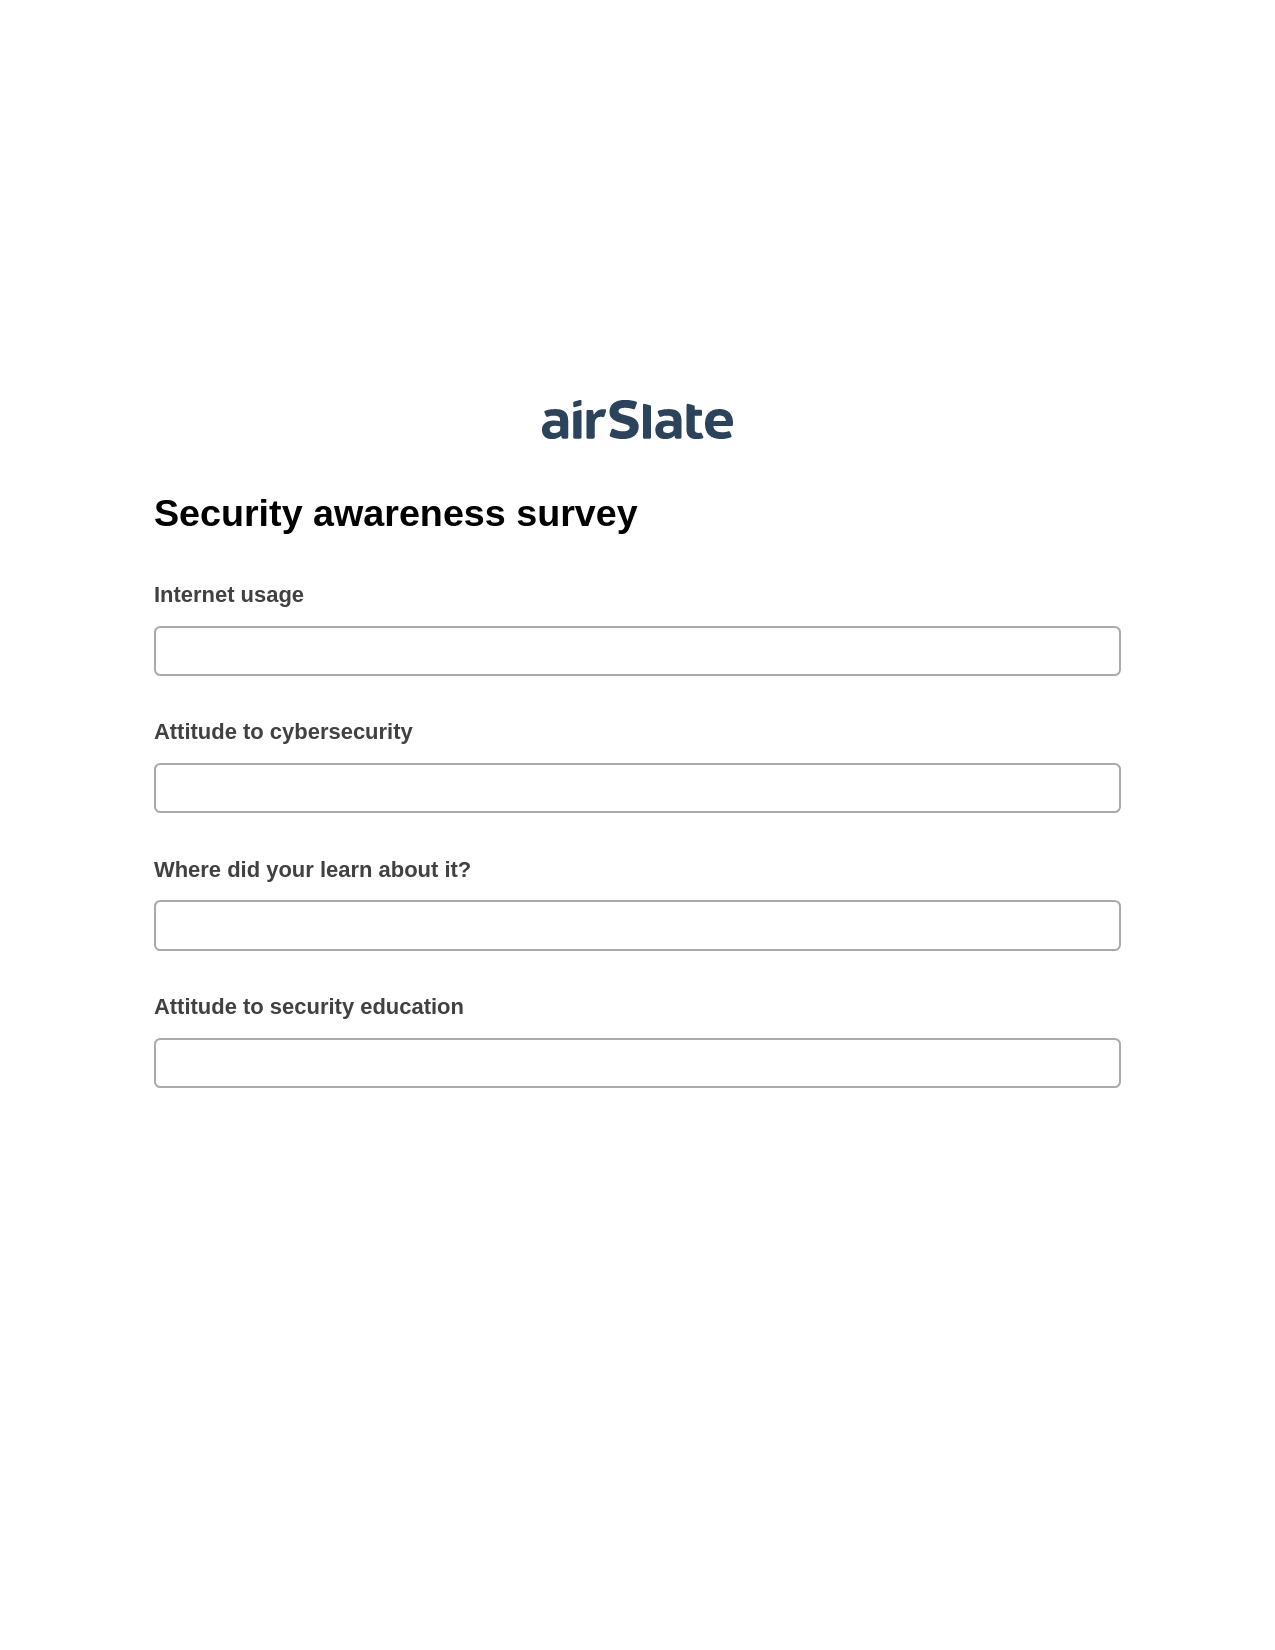 Security awareness survey Pre-fill from CSV File Dropdown Options Bot, Pre-fill with Custom Data Bot, Email Notification Postfinish Bot